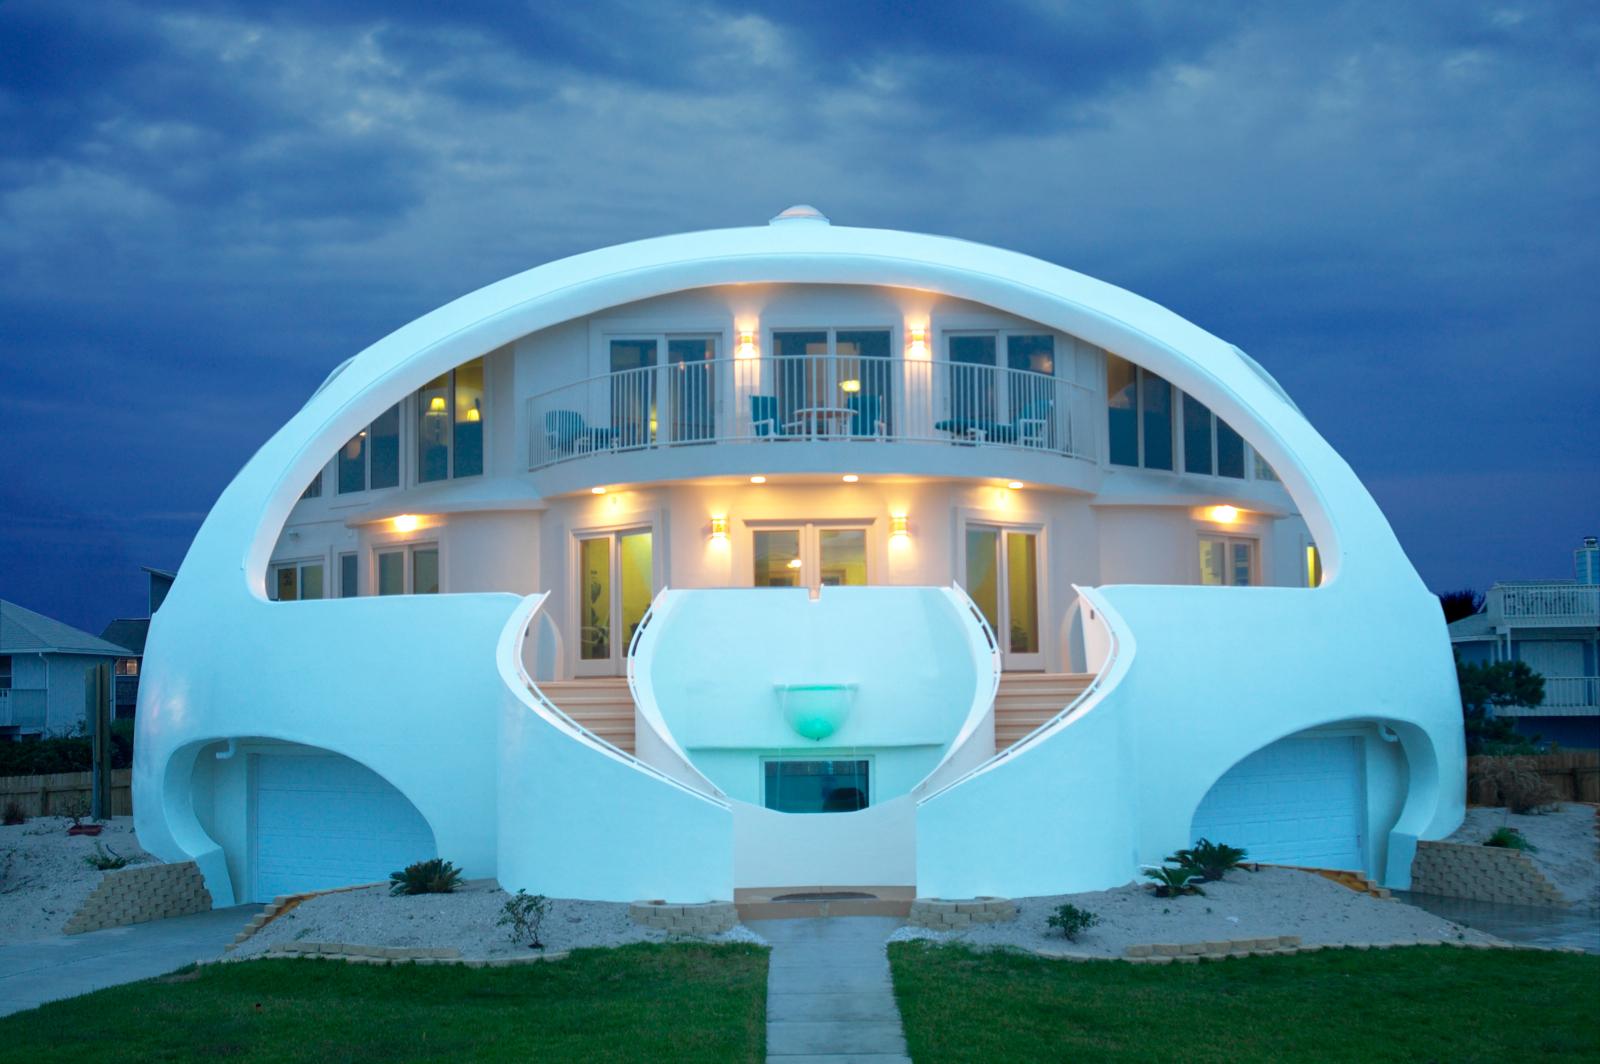 Beautiful twilight image of Dome of a Home beach house